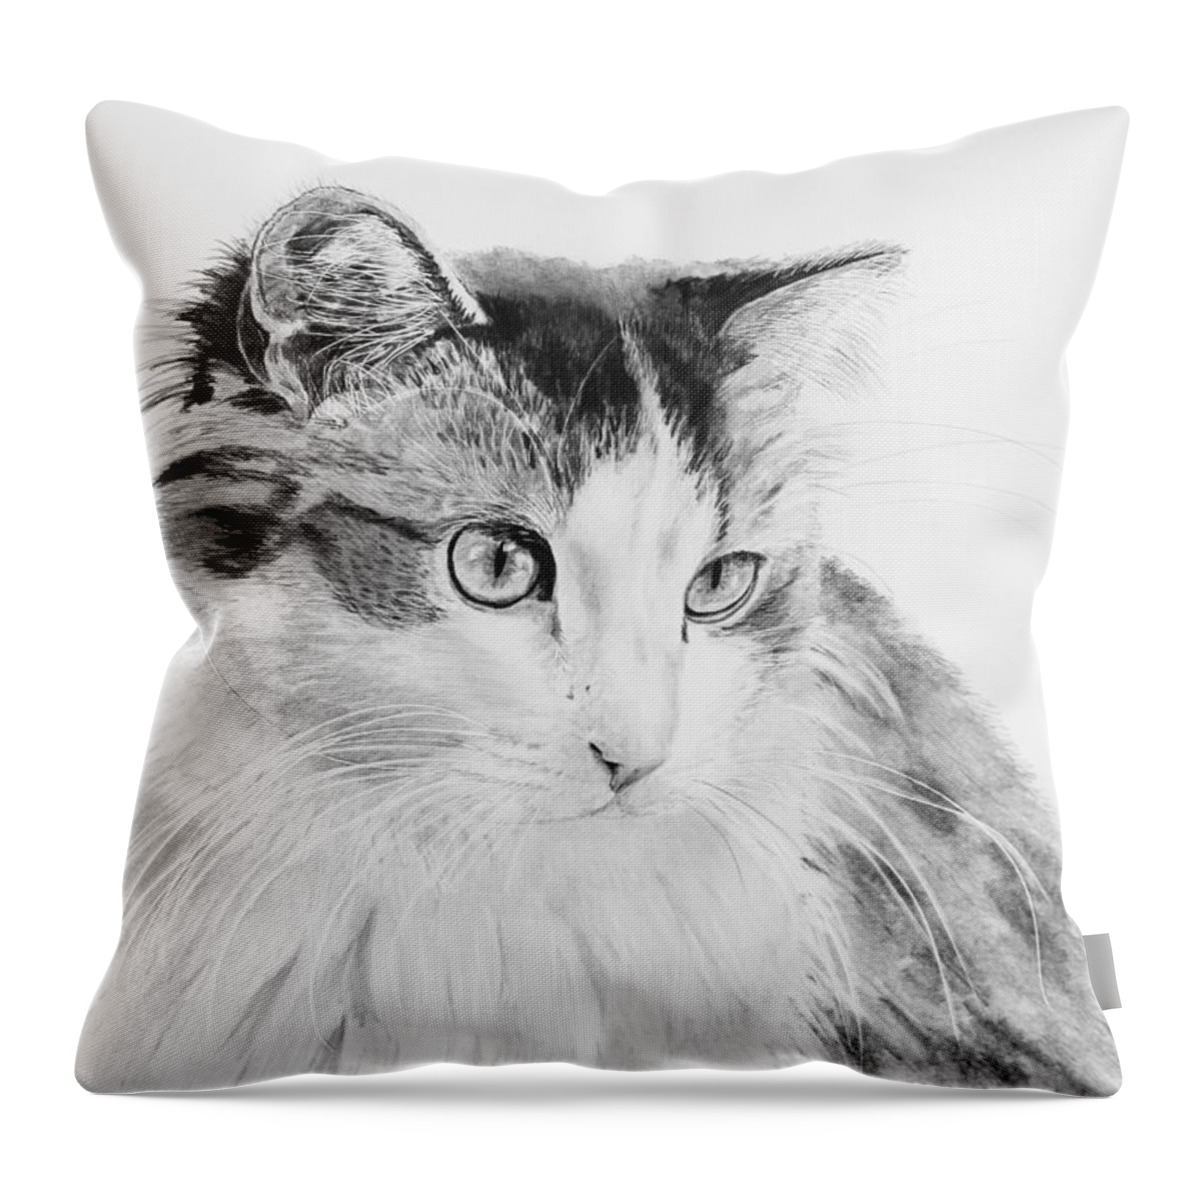 Cat Throw Pillow featuring the drawing Cordova by Gigi Dequanne